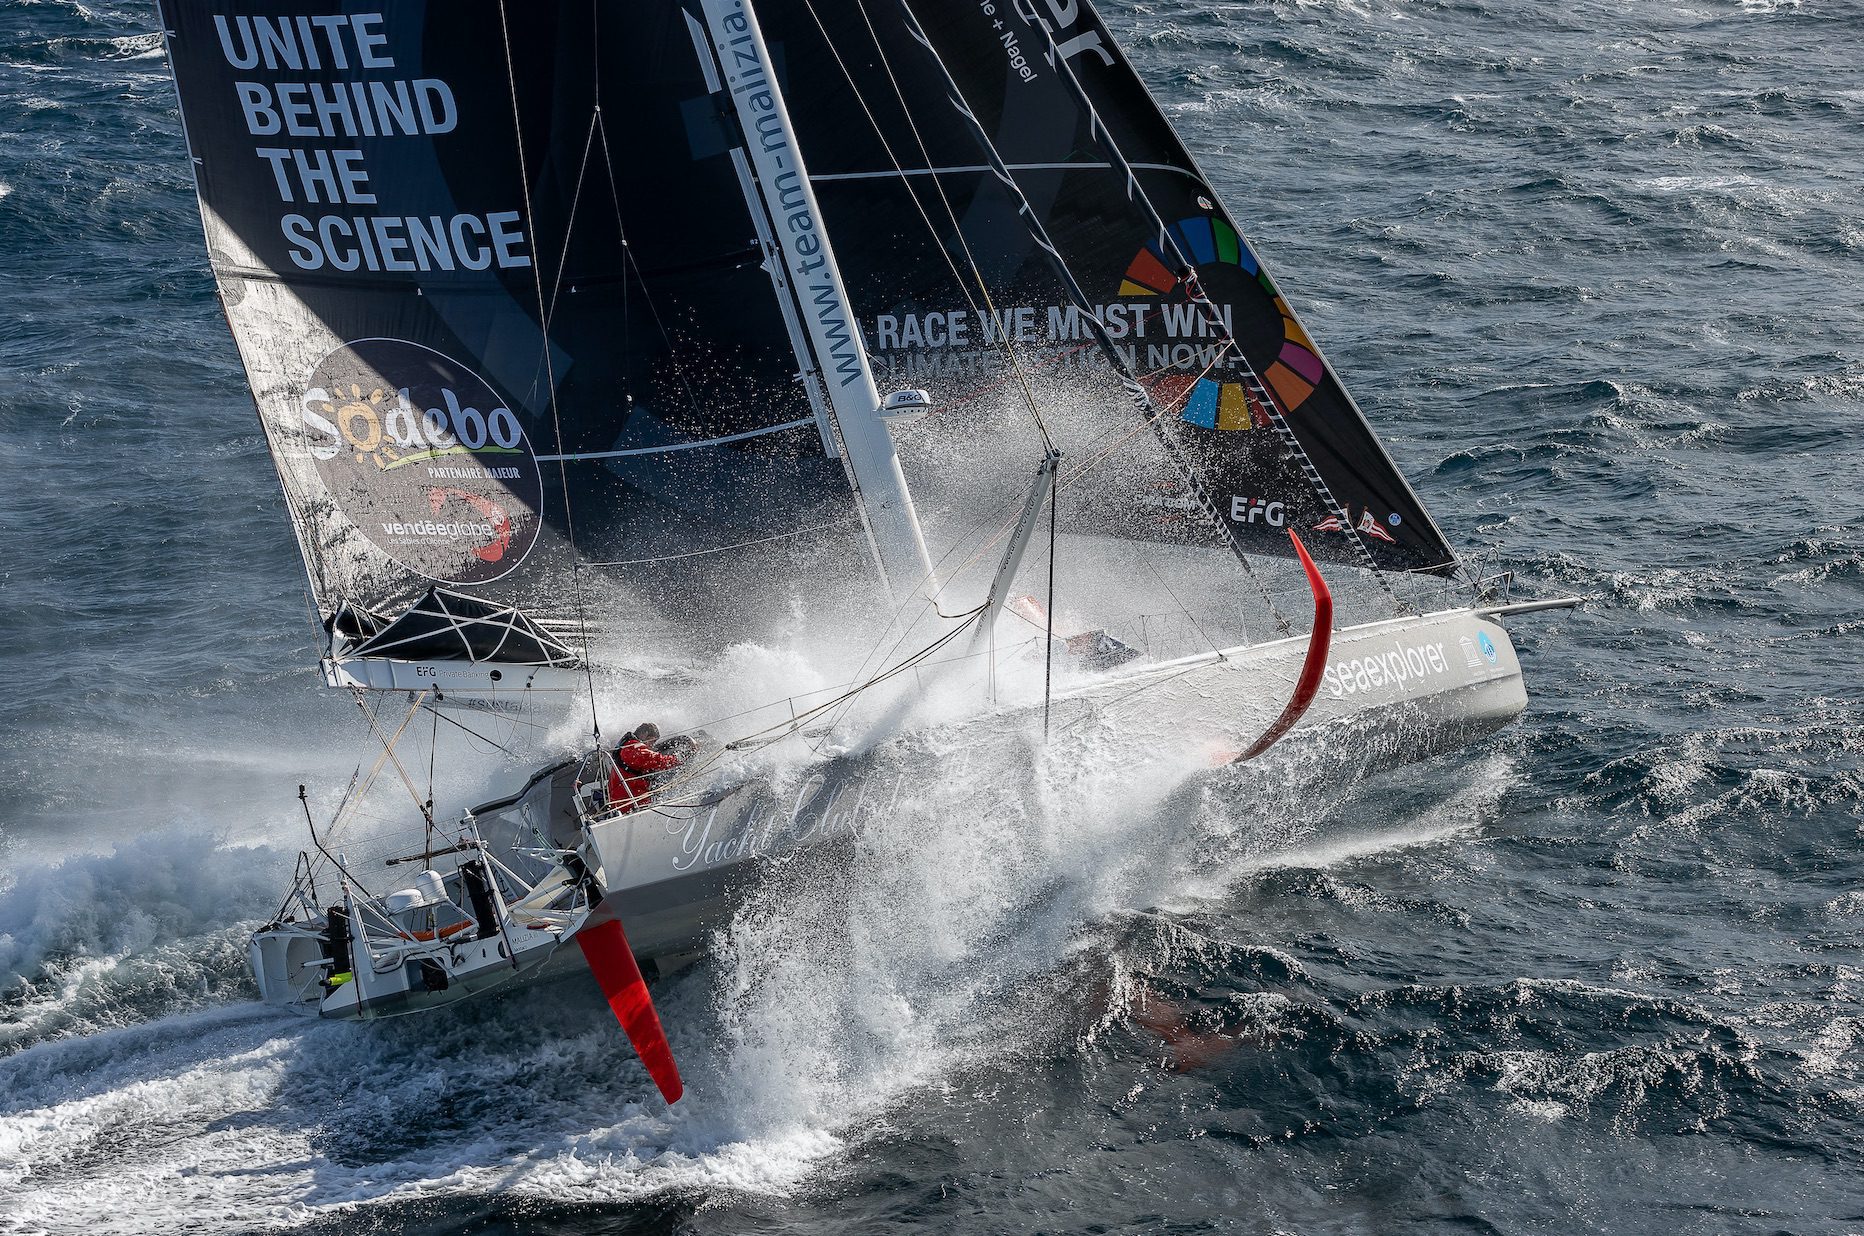 Vendée Globe Skipper Who Had Close Call with Bulk Carrier Collides With Fishing Boat